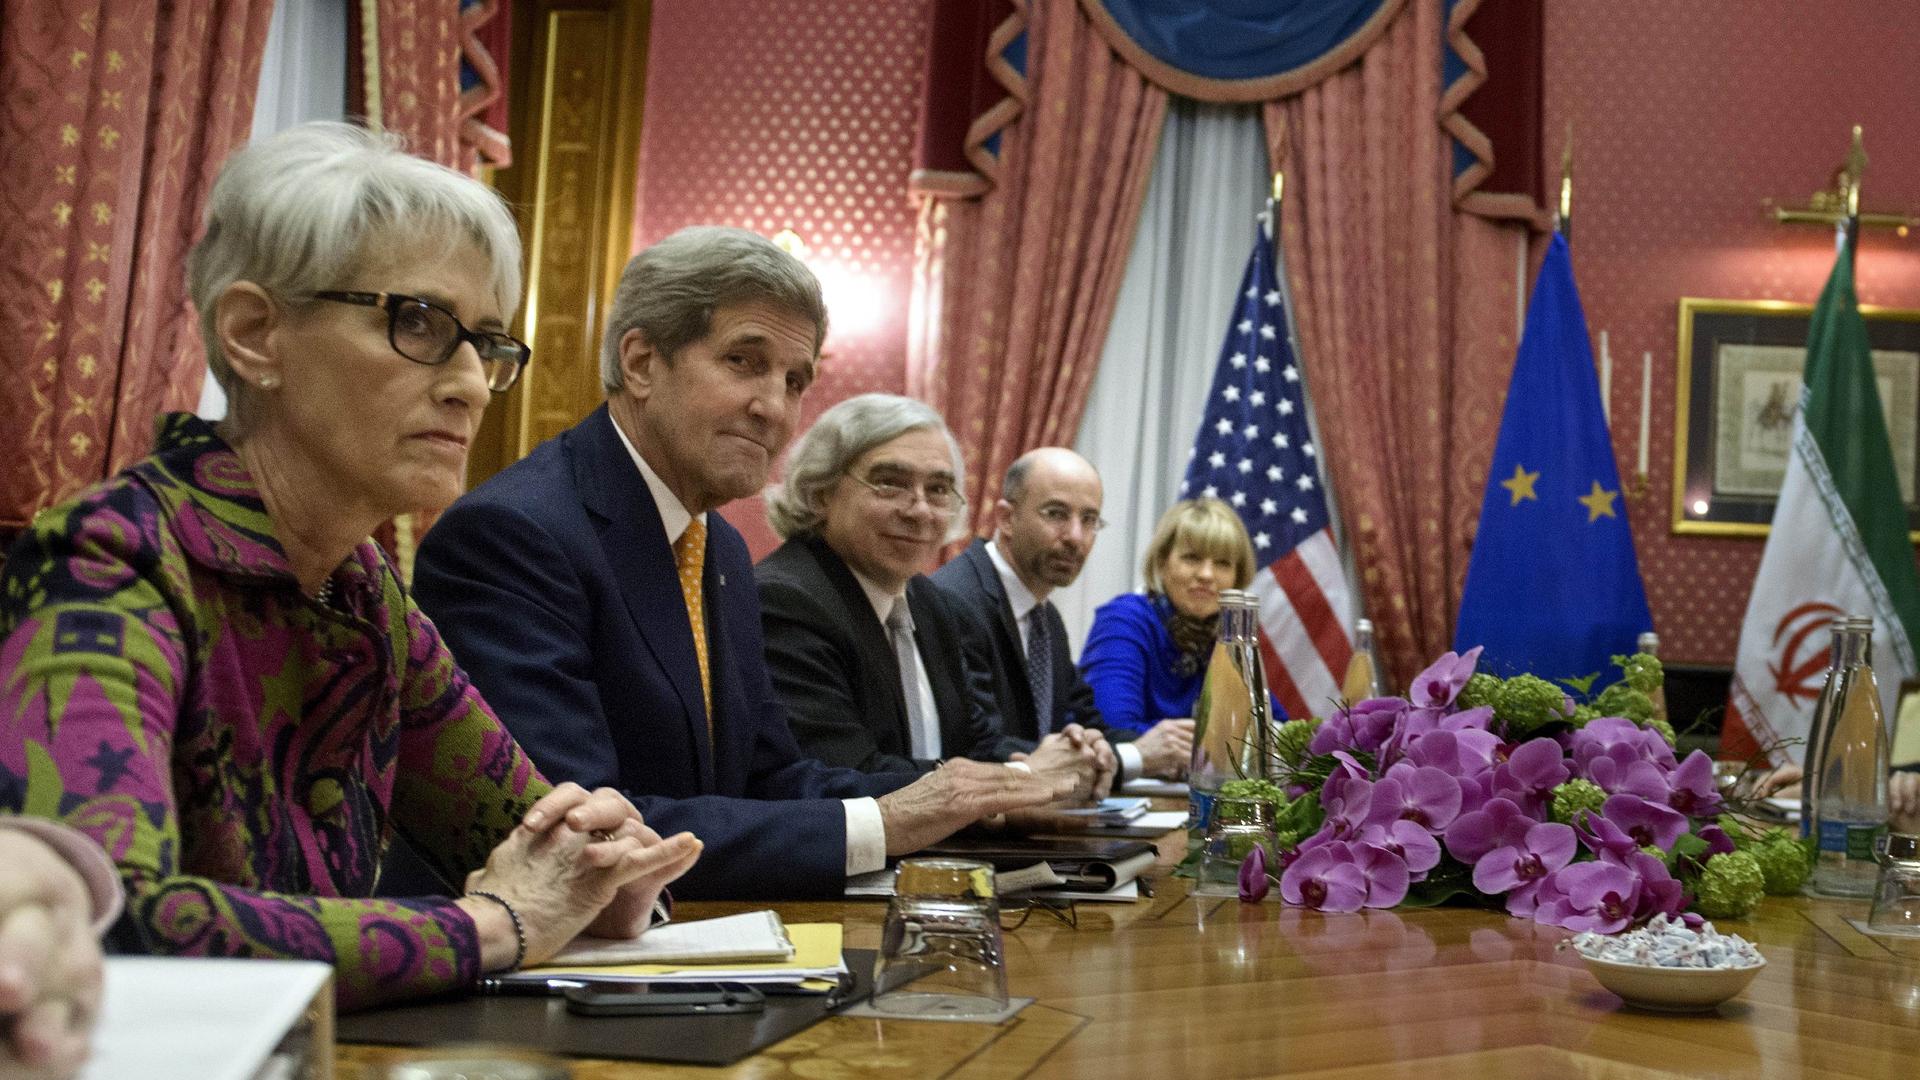 Former US Under Secretary for Political Affairs Wendy Sherman, US Secretary of State John Kerry, US Secretary of Energy Ernest Moniz, National Security Council point person on the Middle East Robert Malley and European Union Political Director Helga Schmi